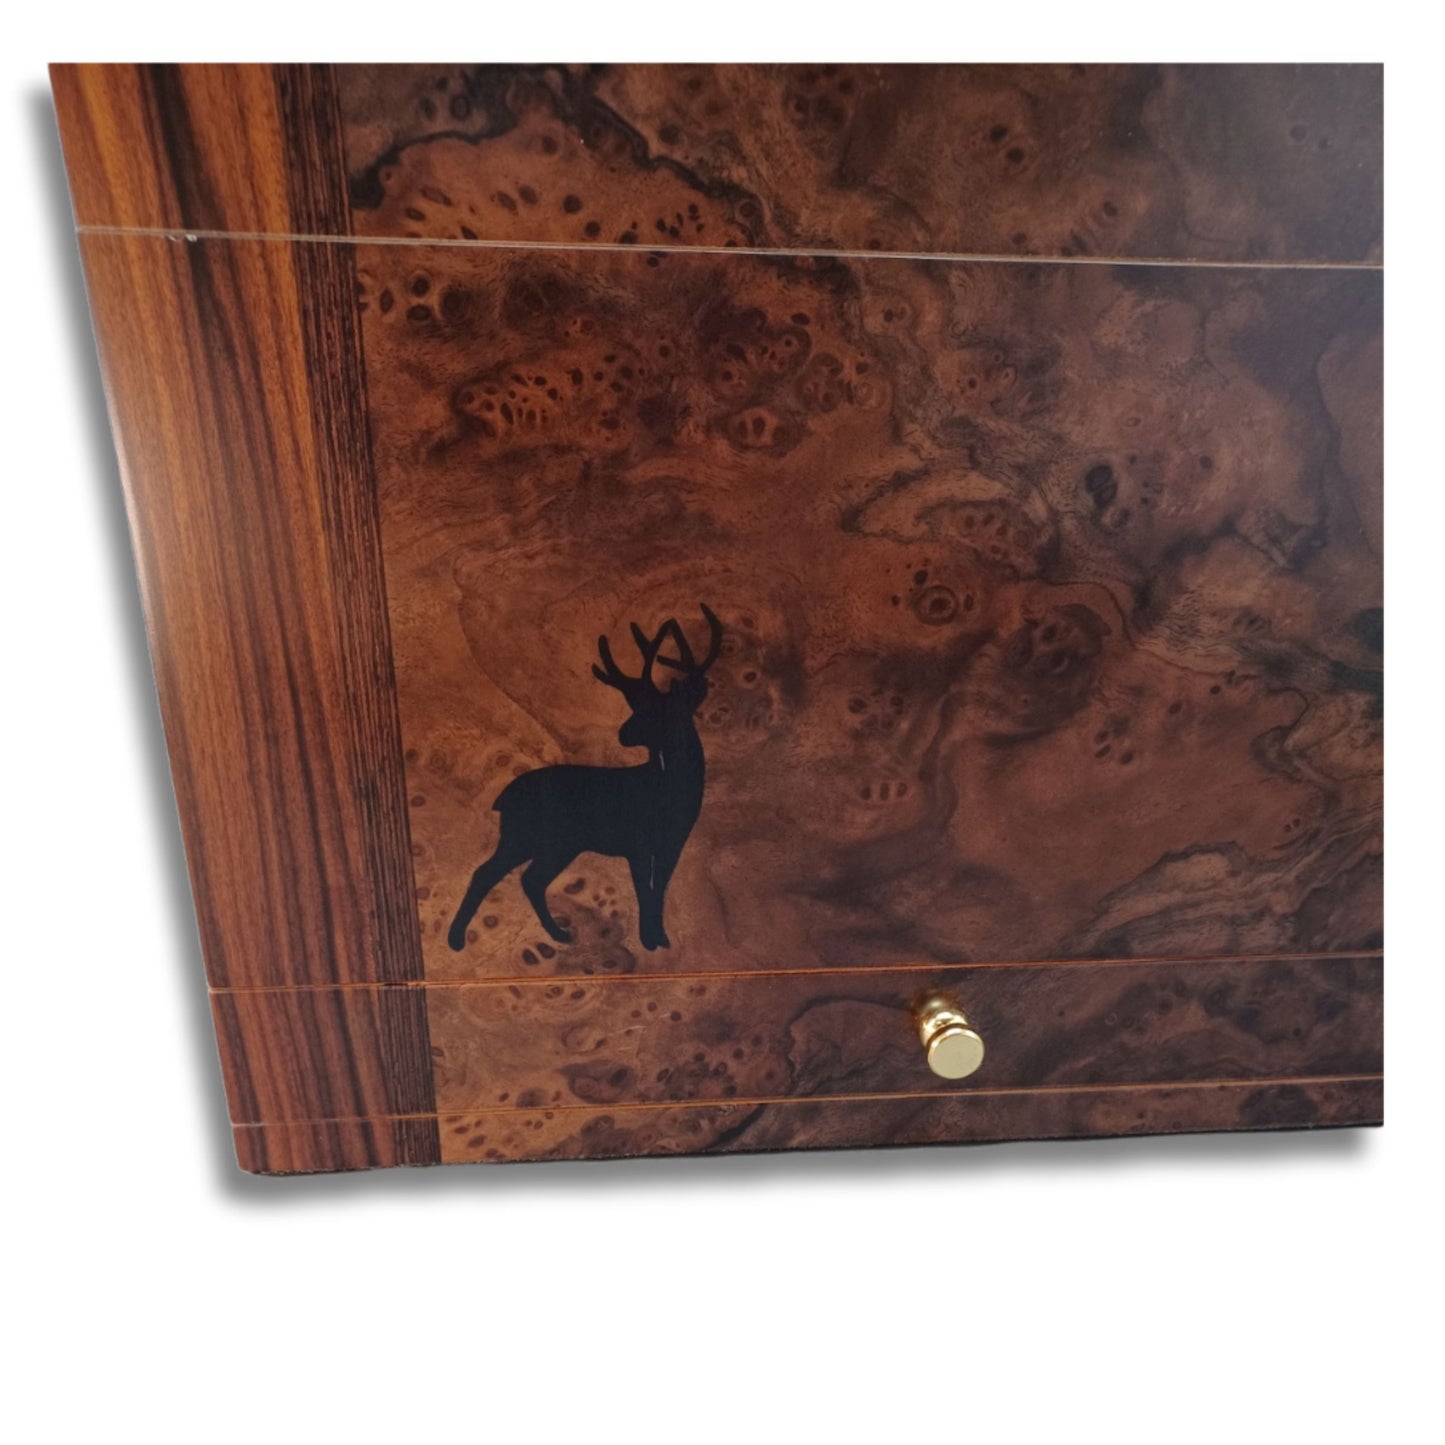 The Hunter 75-Count  Custom Humidor  Two-Toned Finish, and Drawer)  Made in the U.S.